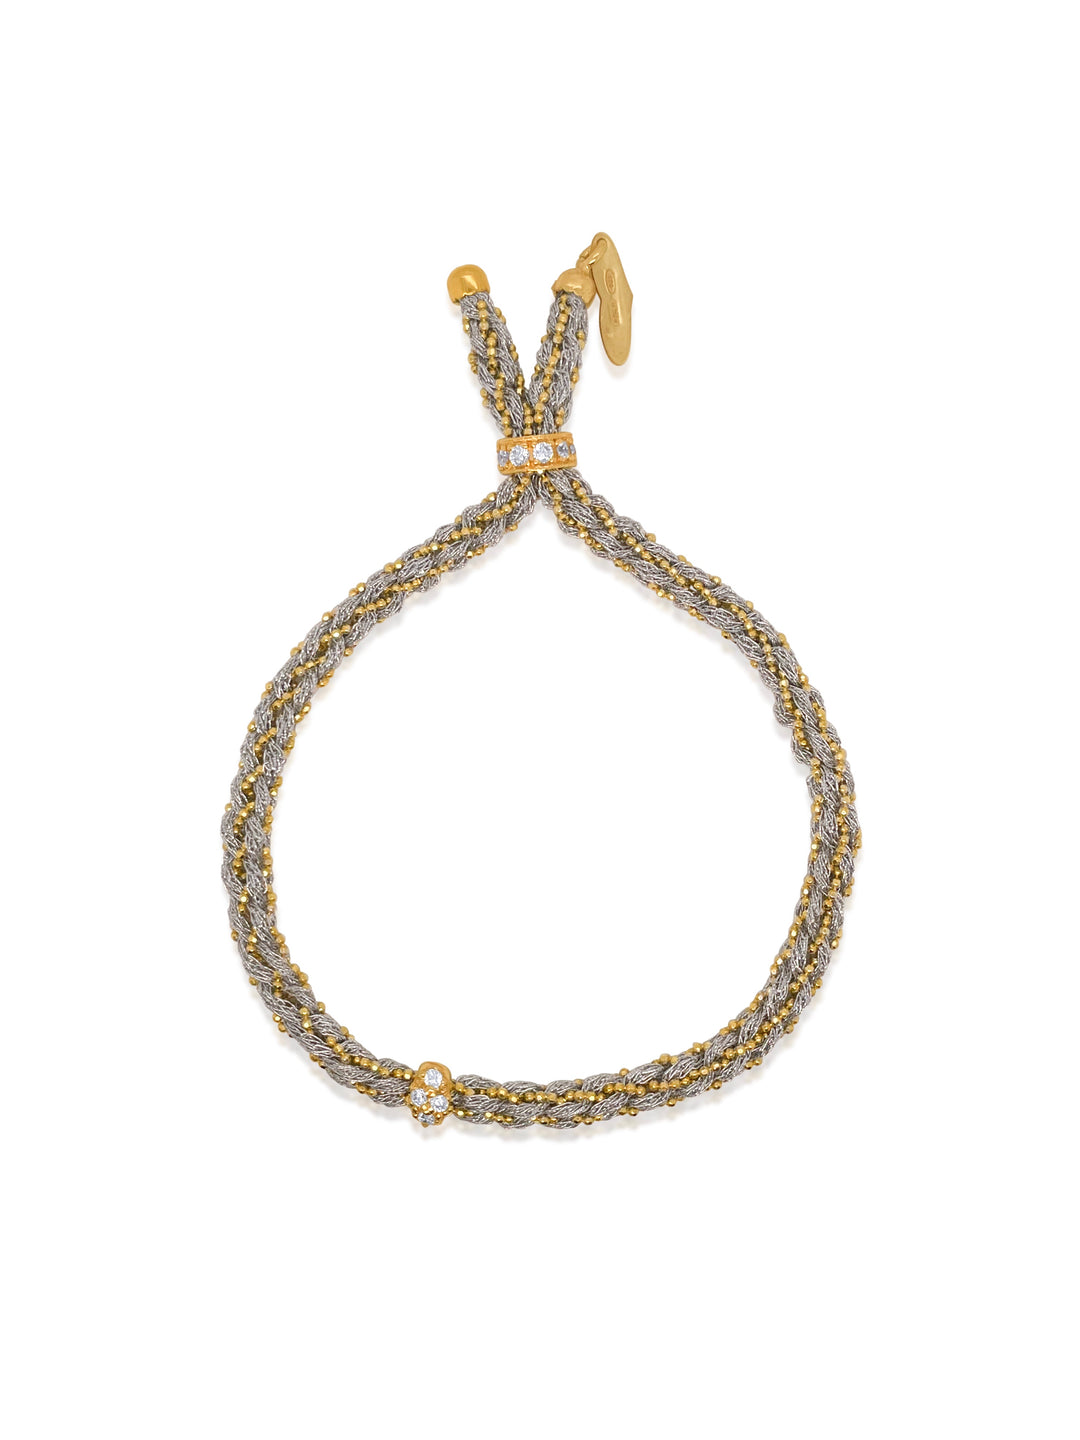 Yellow Gold Braided Chain and Silver Silk Bracelet with CZ Oval